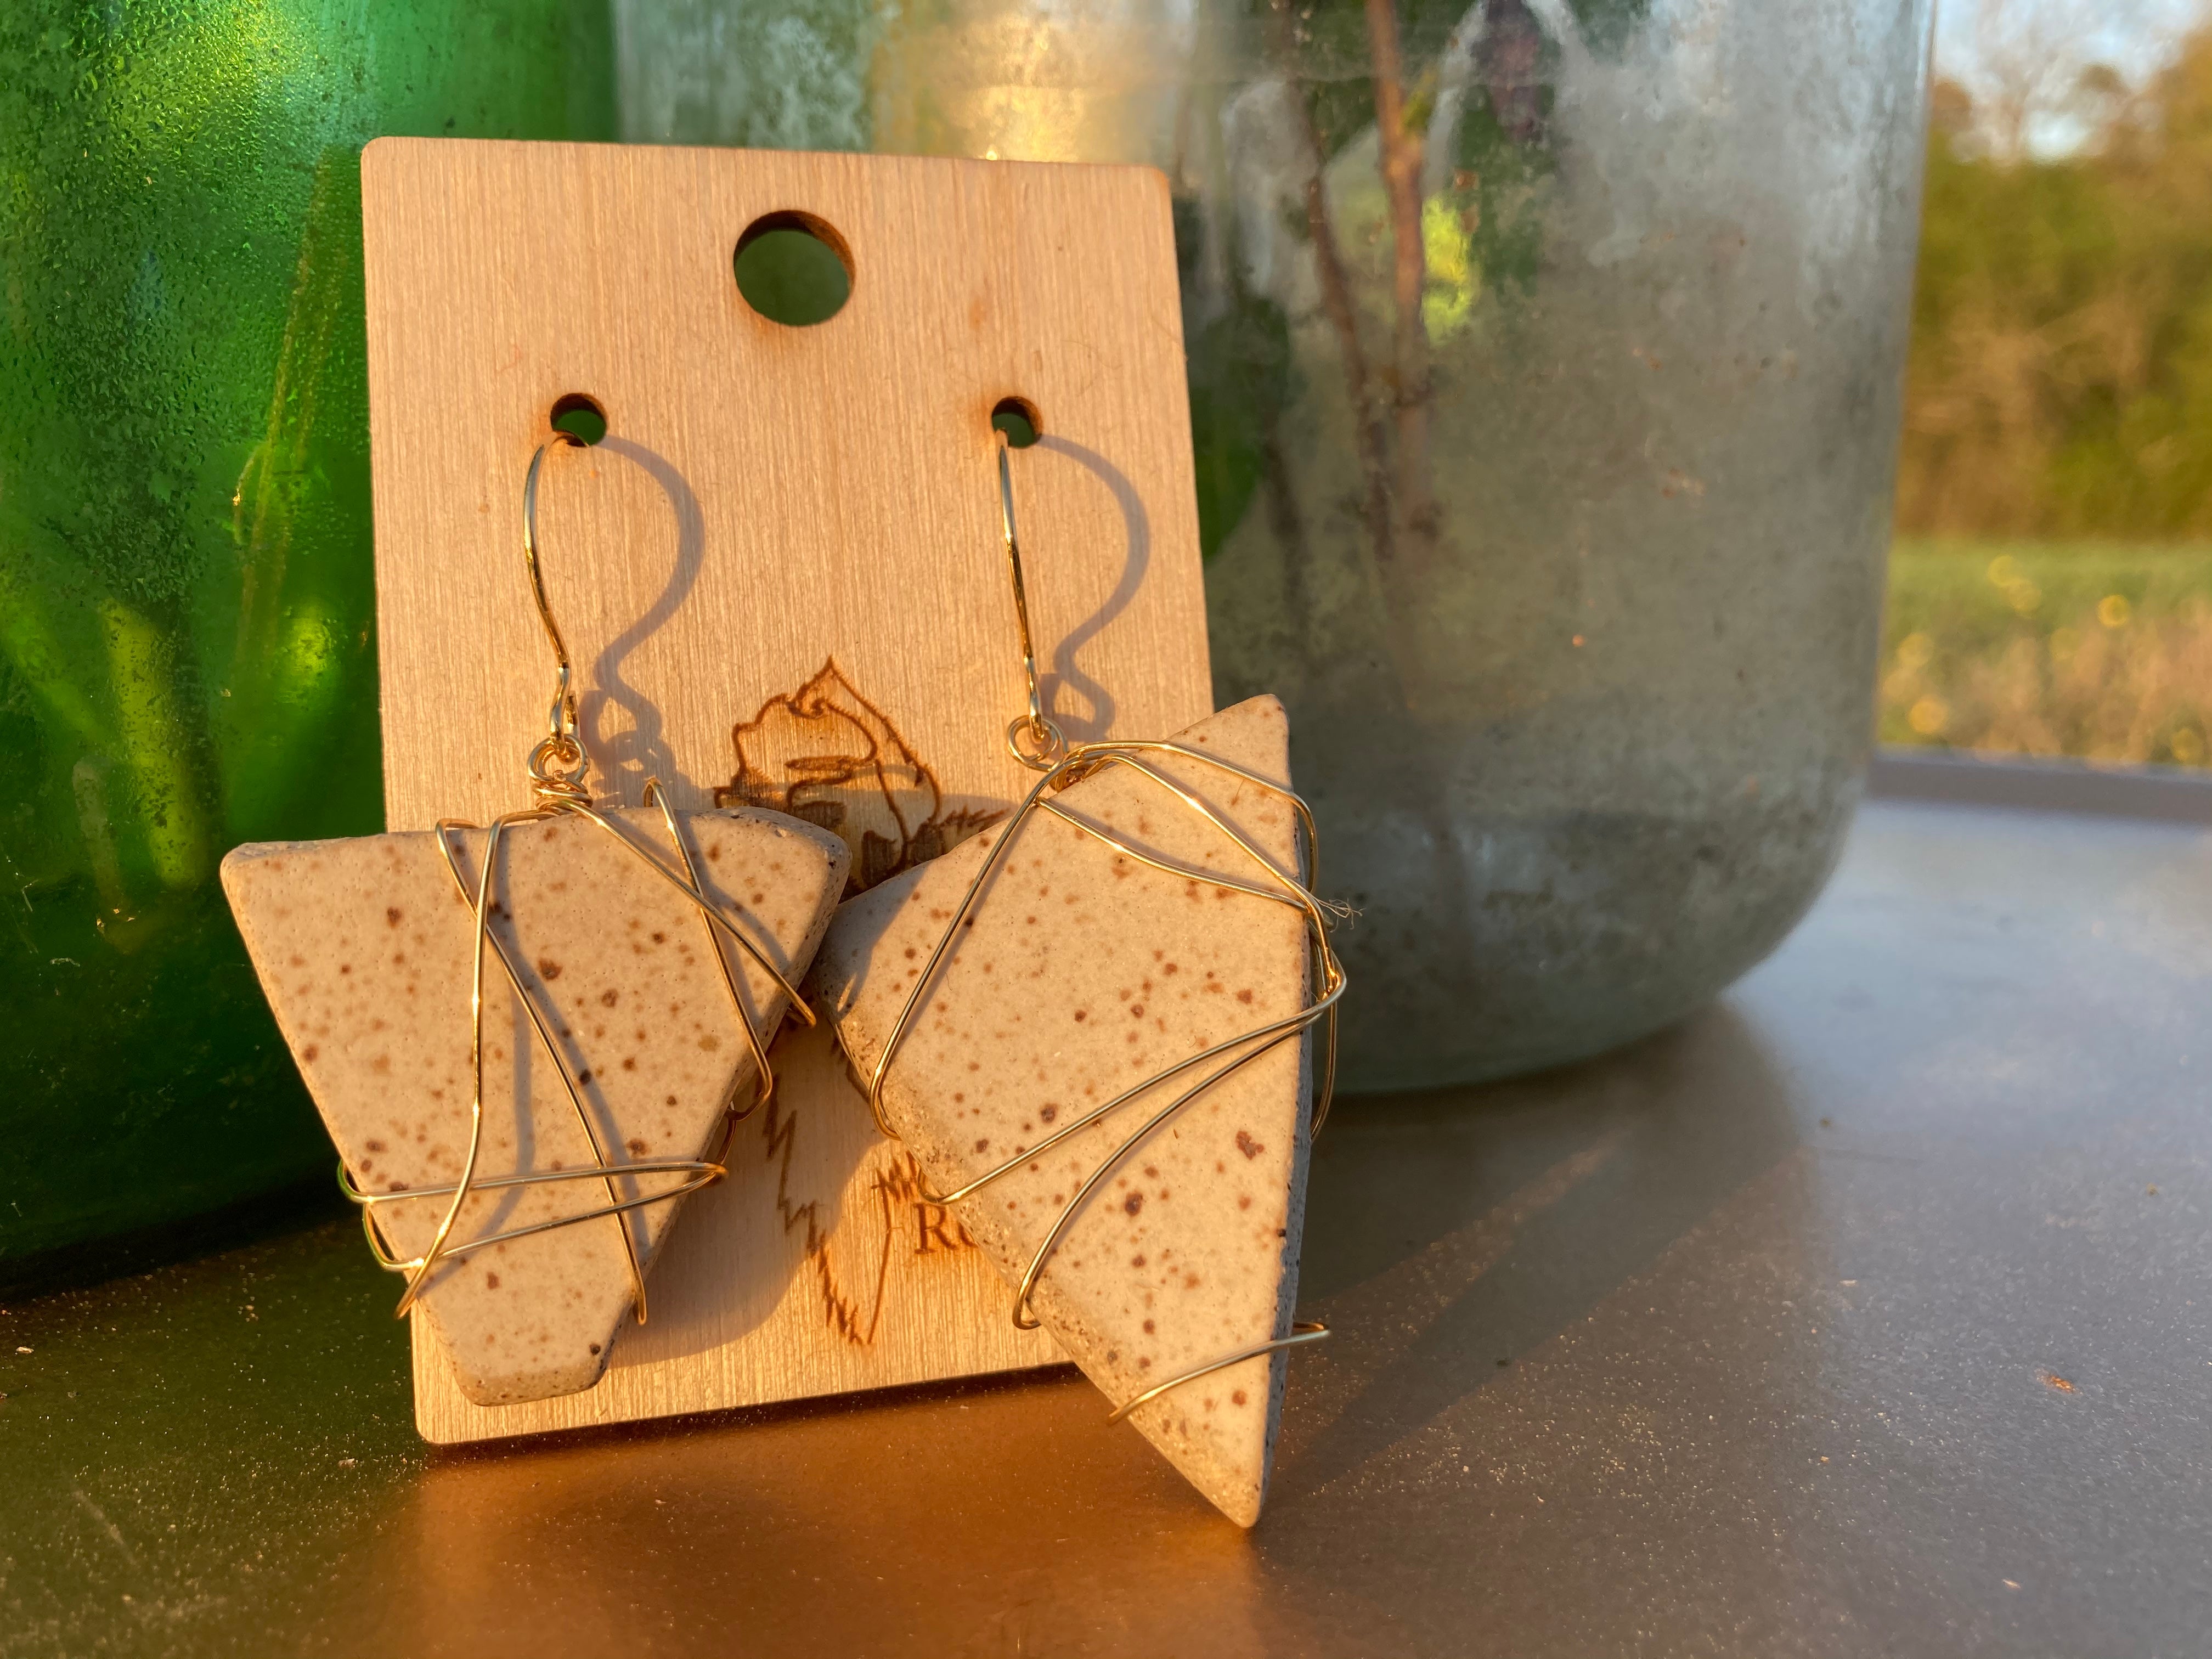 Recycled Pottery & Gold Dangles